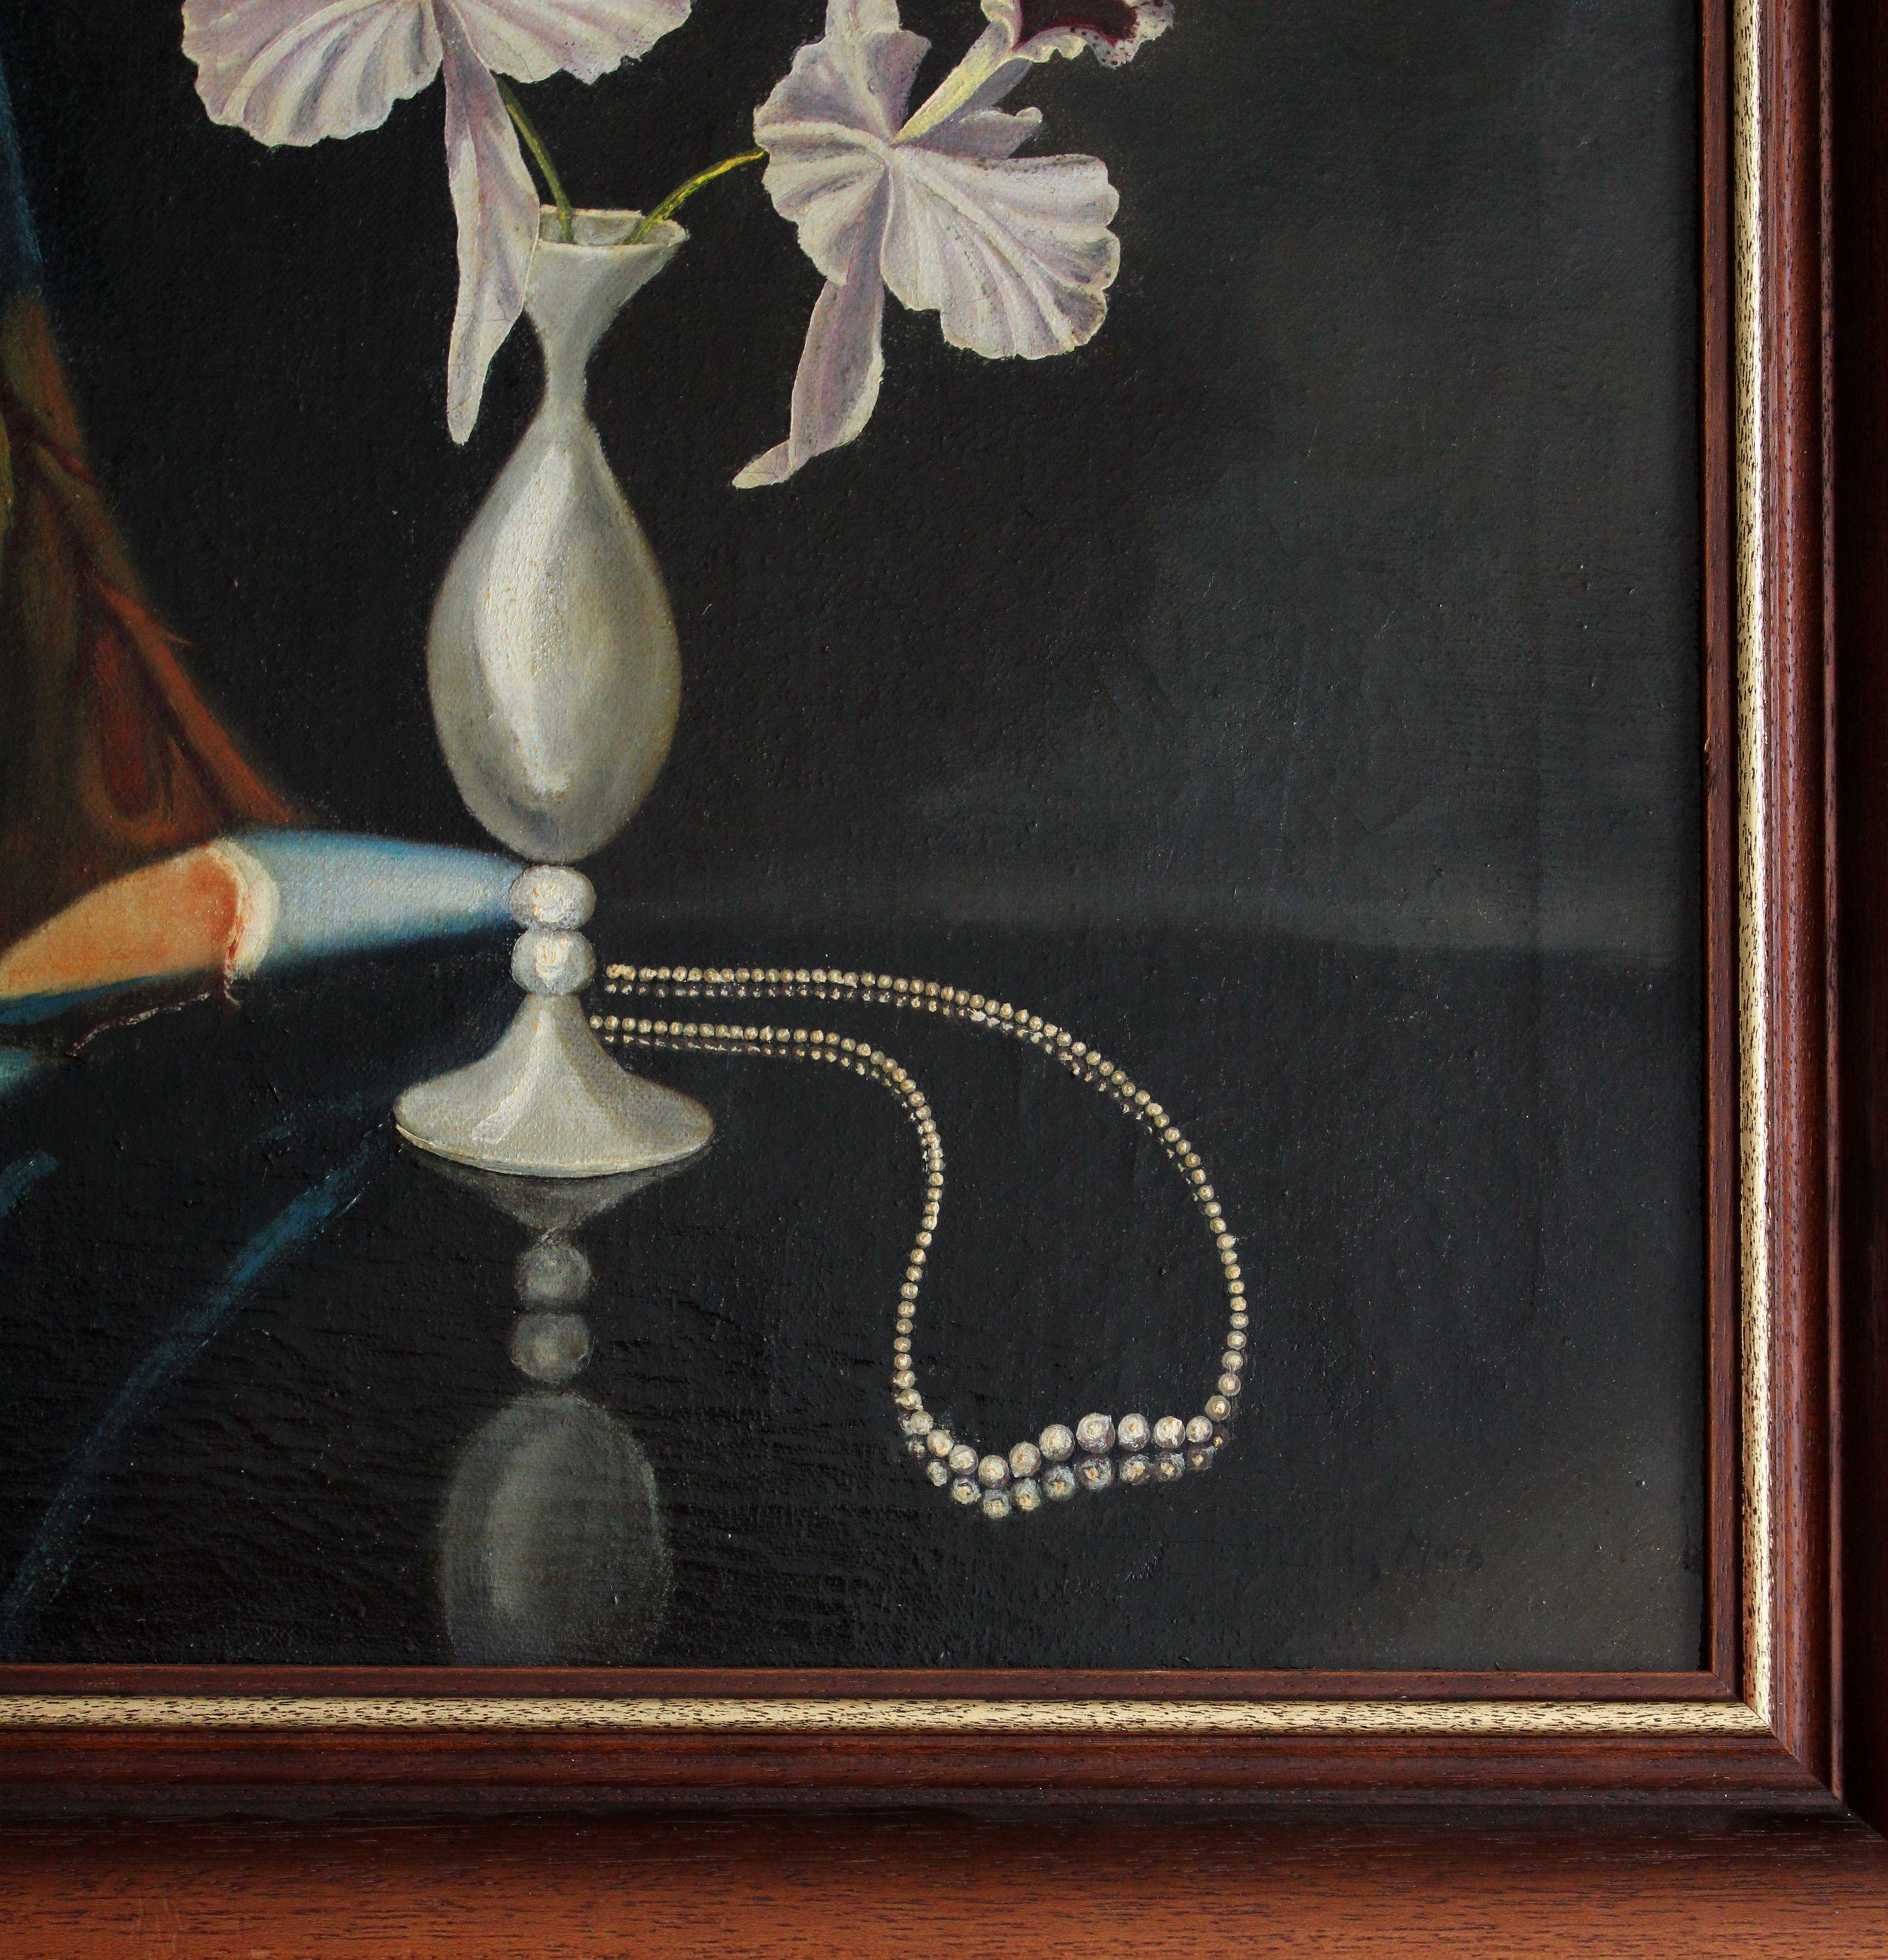 Still life with pearls. Oil on canvas, 50 x 40, 5 cm 2